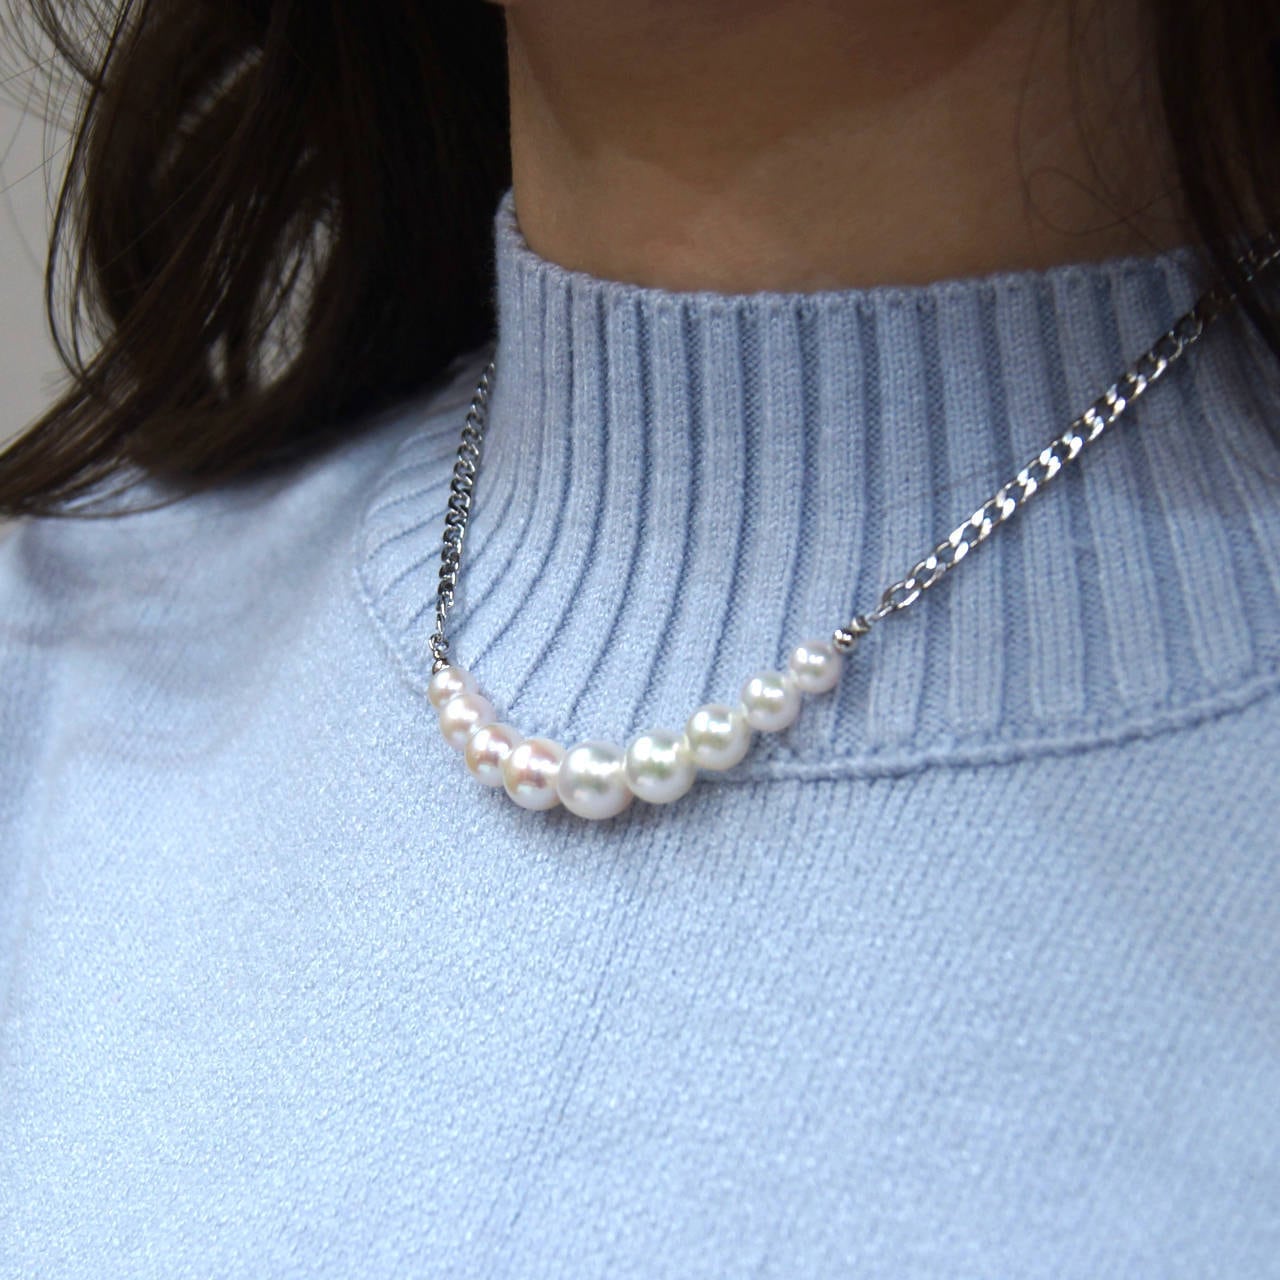 Akoya Pearl Neckless Scalae｜伊勢志摩産あこや真珠 アコヤ本真珠｜9粒 パールネックレス